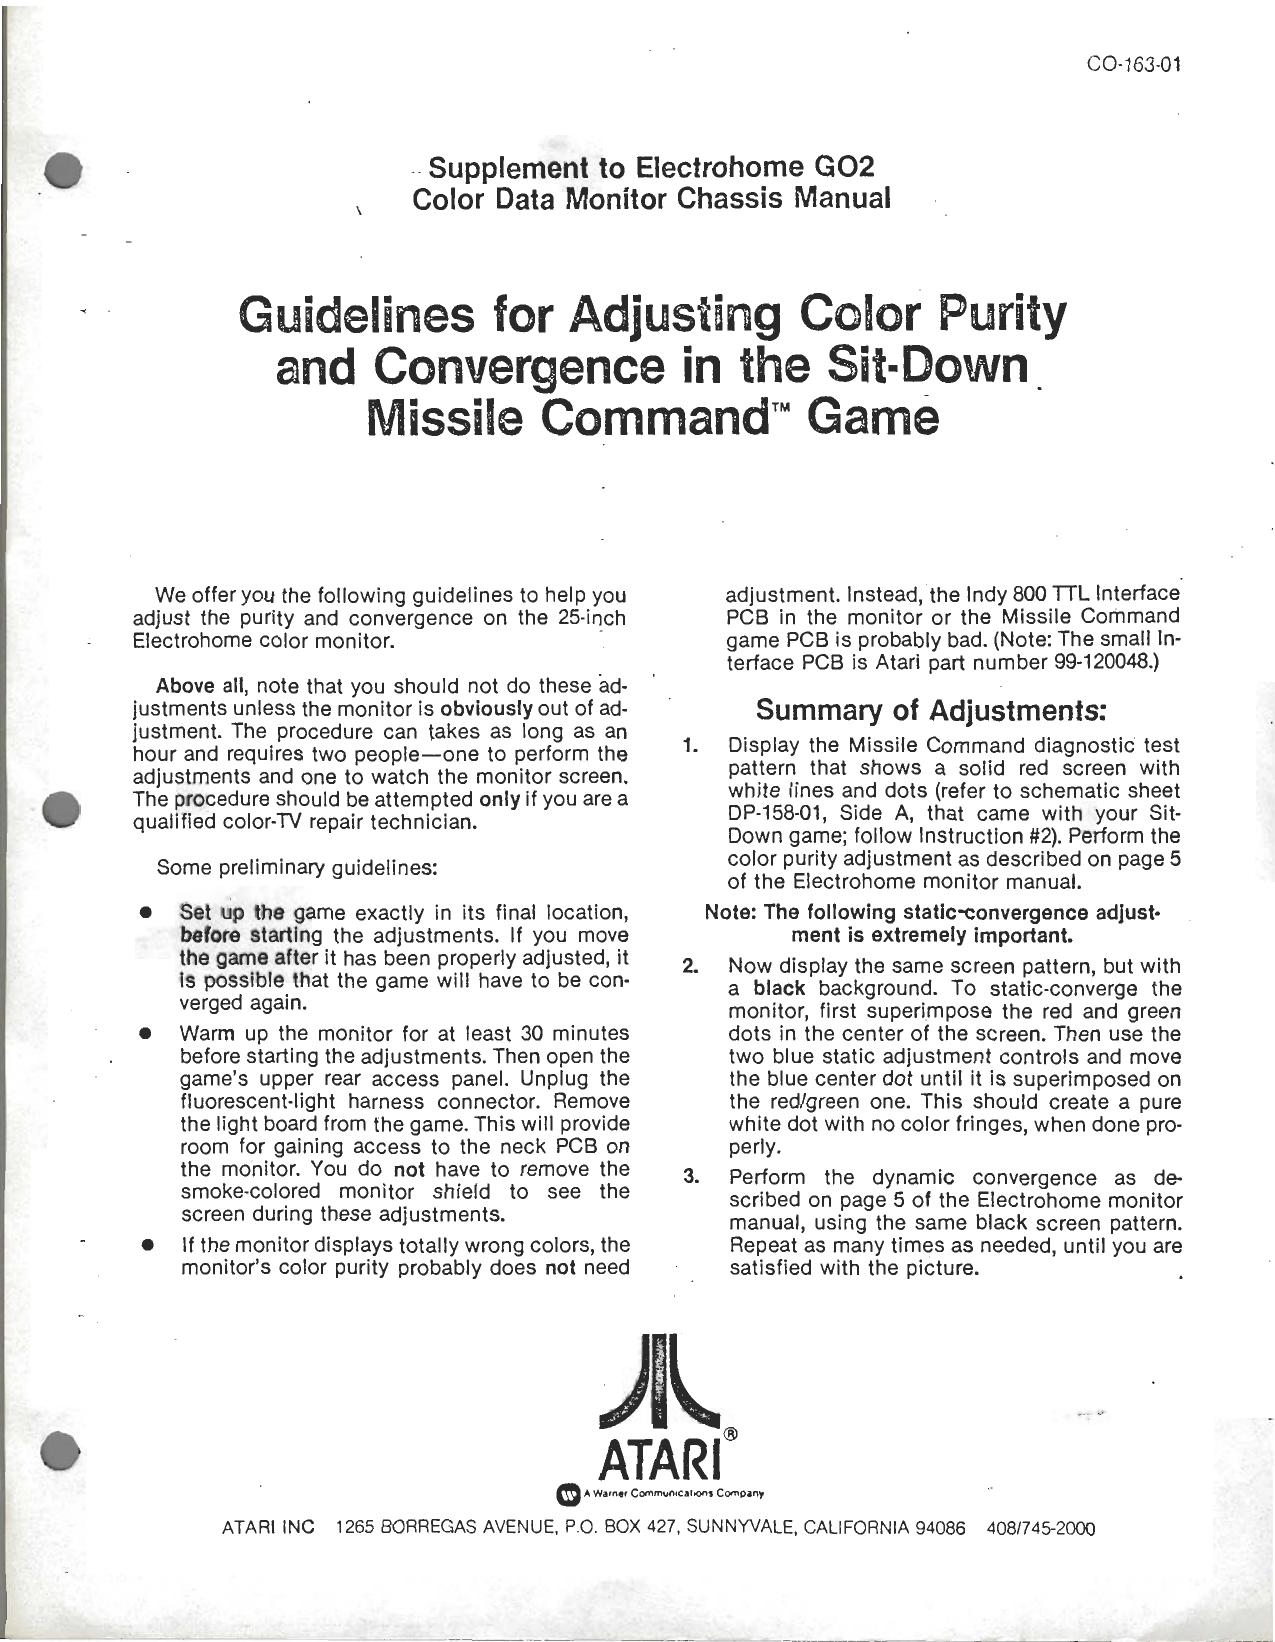 Missle Command Sitdown CO-163-01 (Supplement for G02)